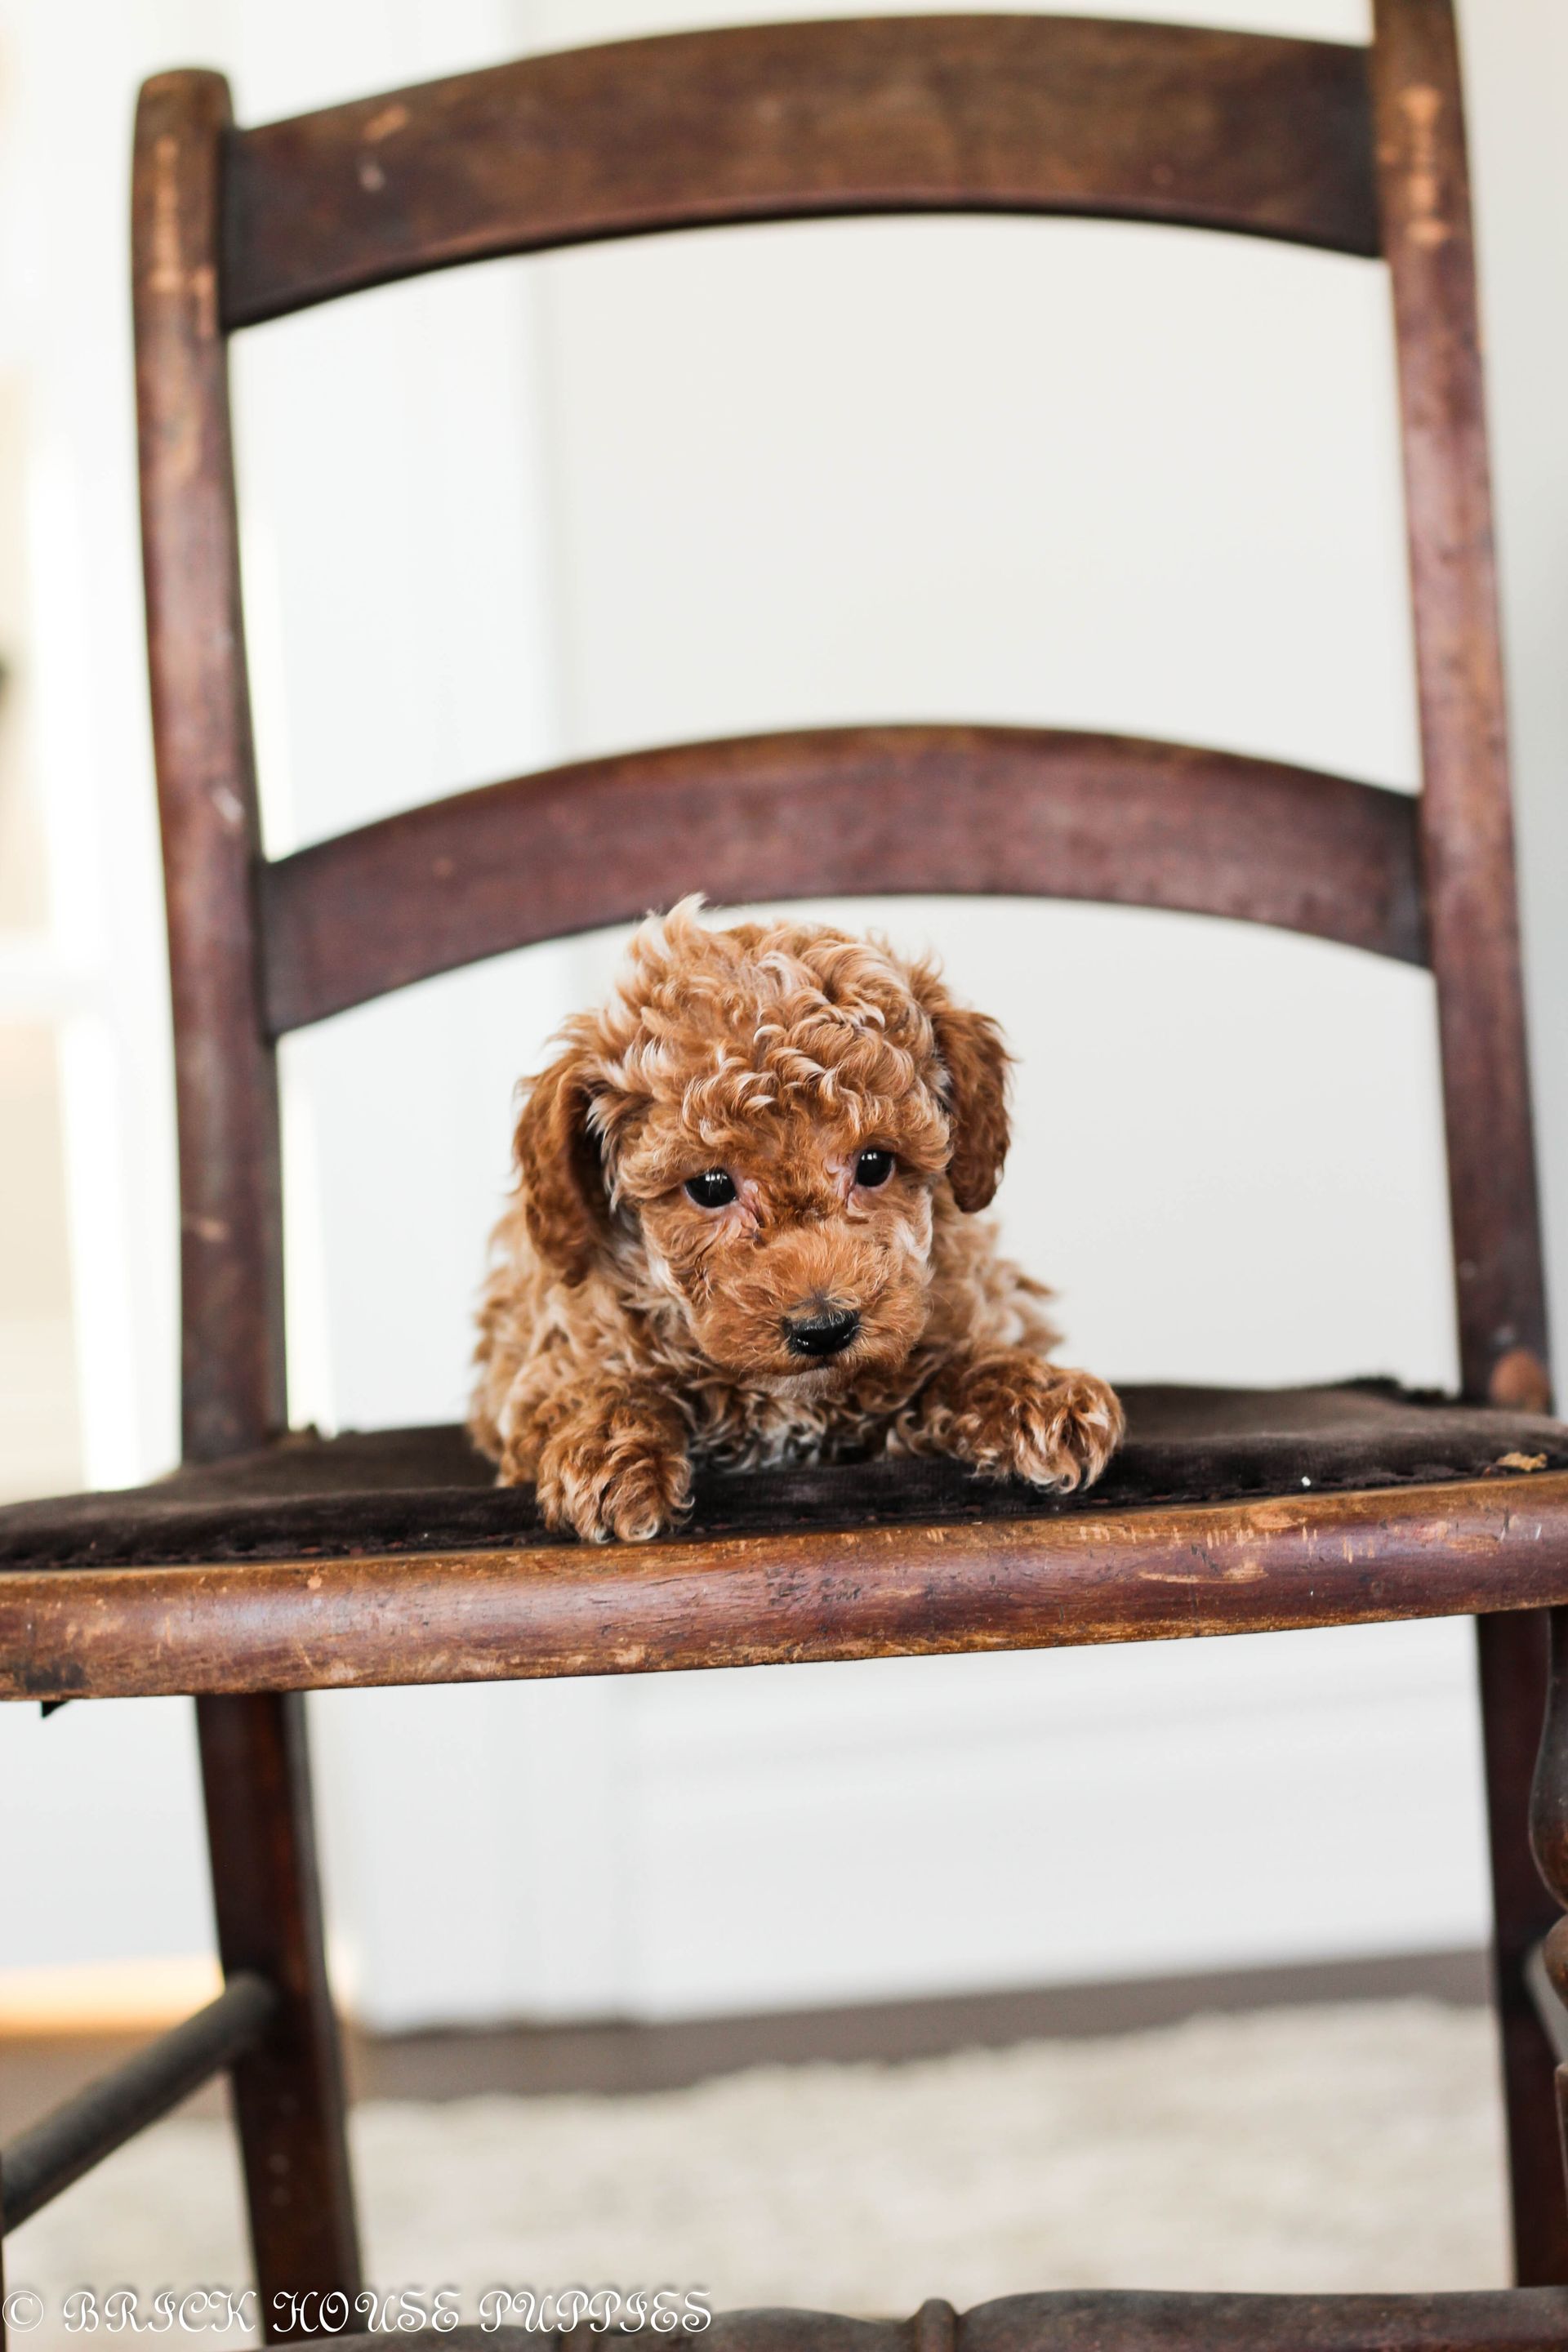 toy poodle puppies for sale, toy poodle breeder, toy poodle, parti poodle, poodle, puppies for sale, poodle breeder